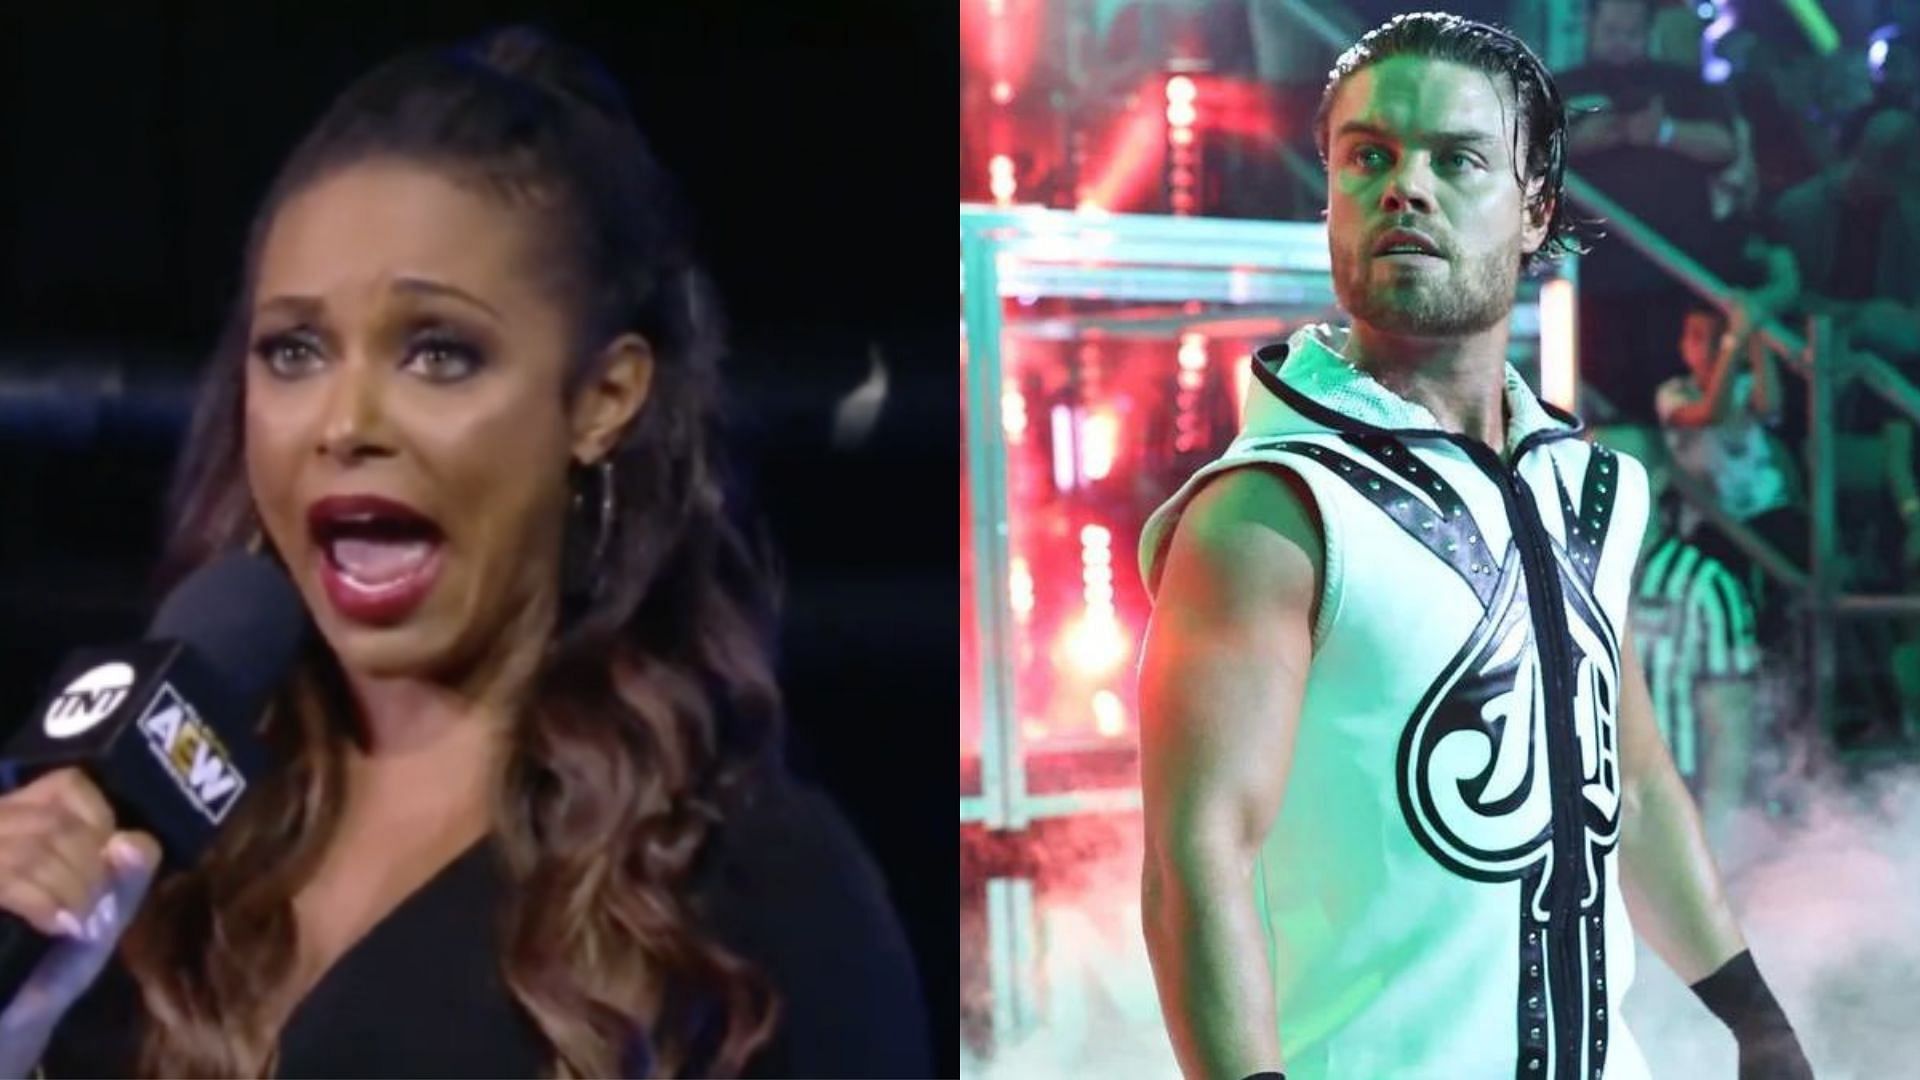 Brandi Rhodes certainly took note of JD McDonagh